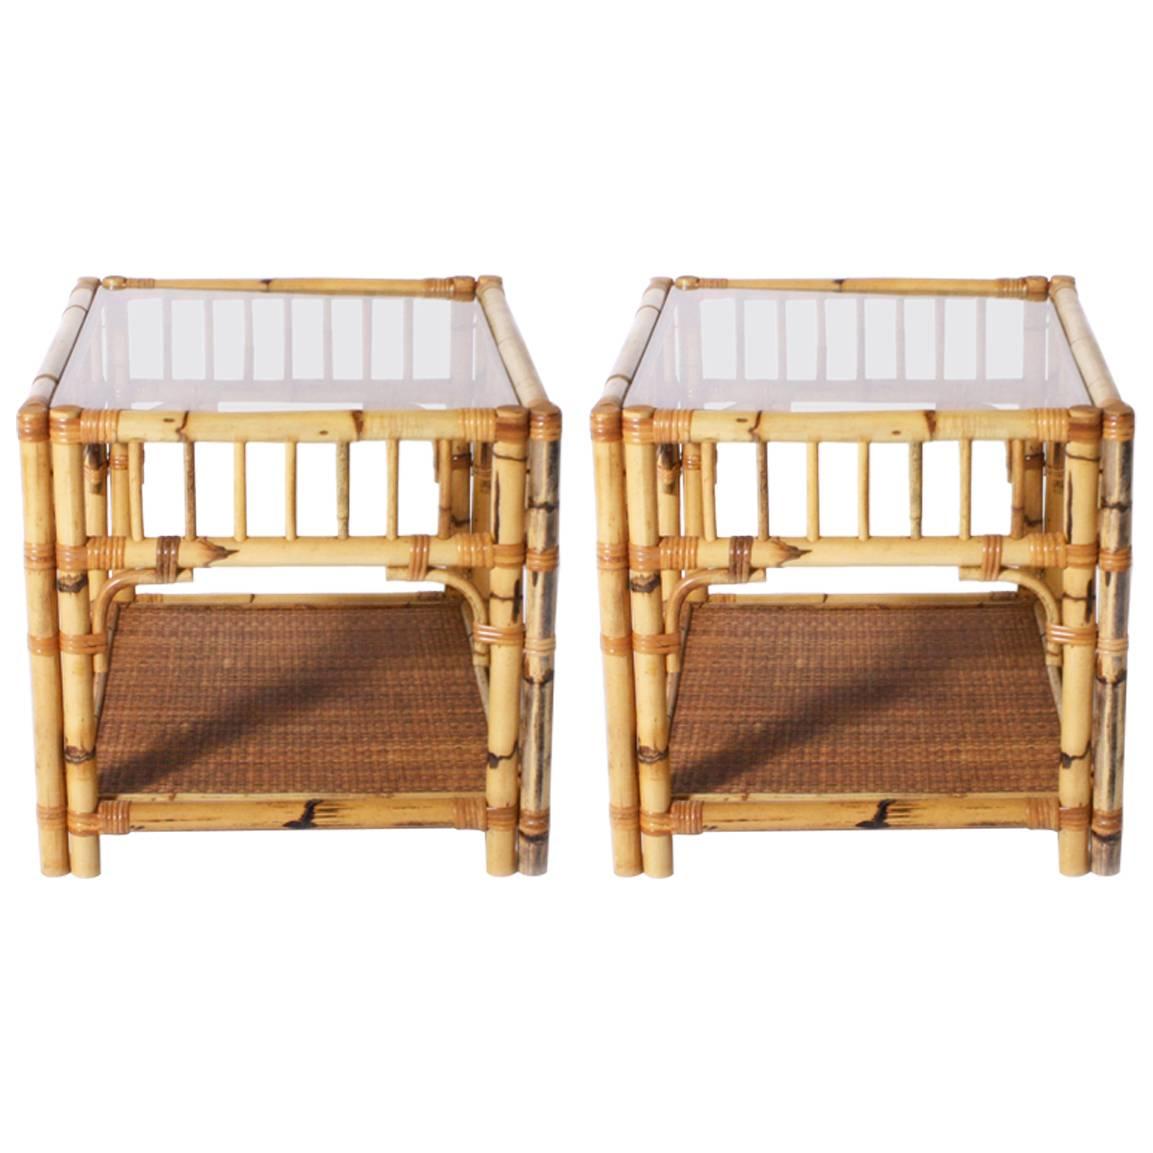 Pair of Burnt Bamboo and Rattan Side Tables with Glass Tops, circa 1970